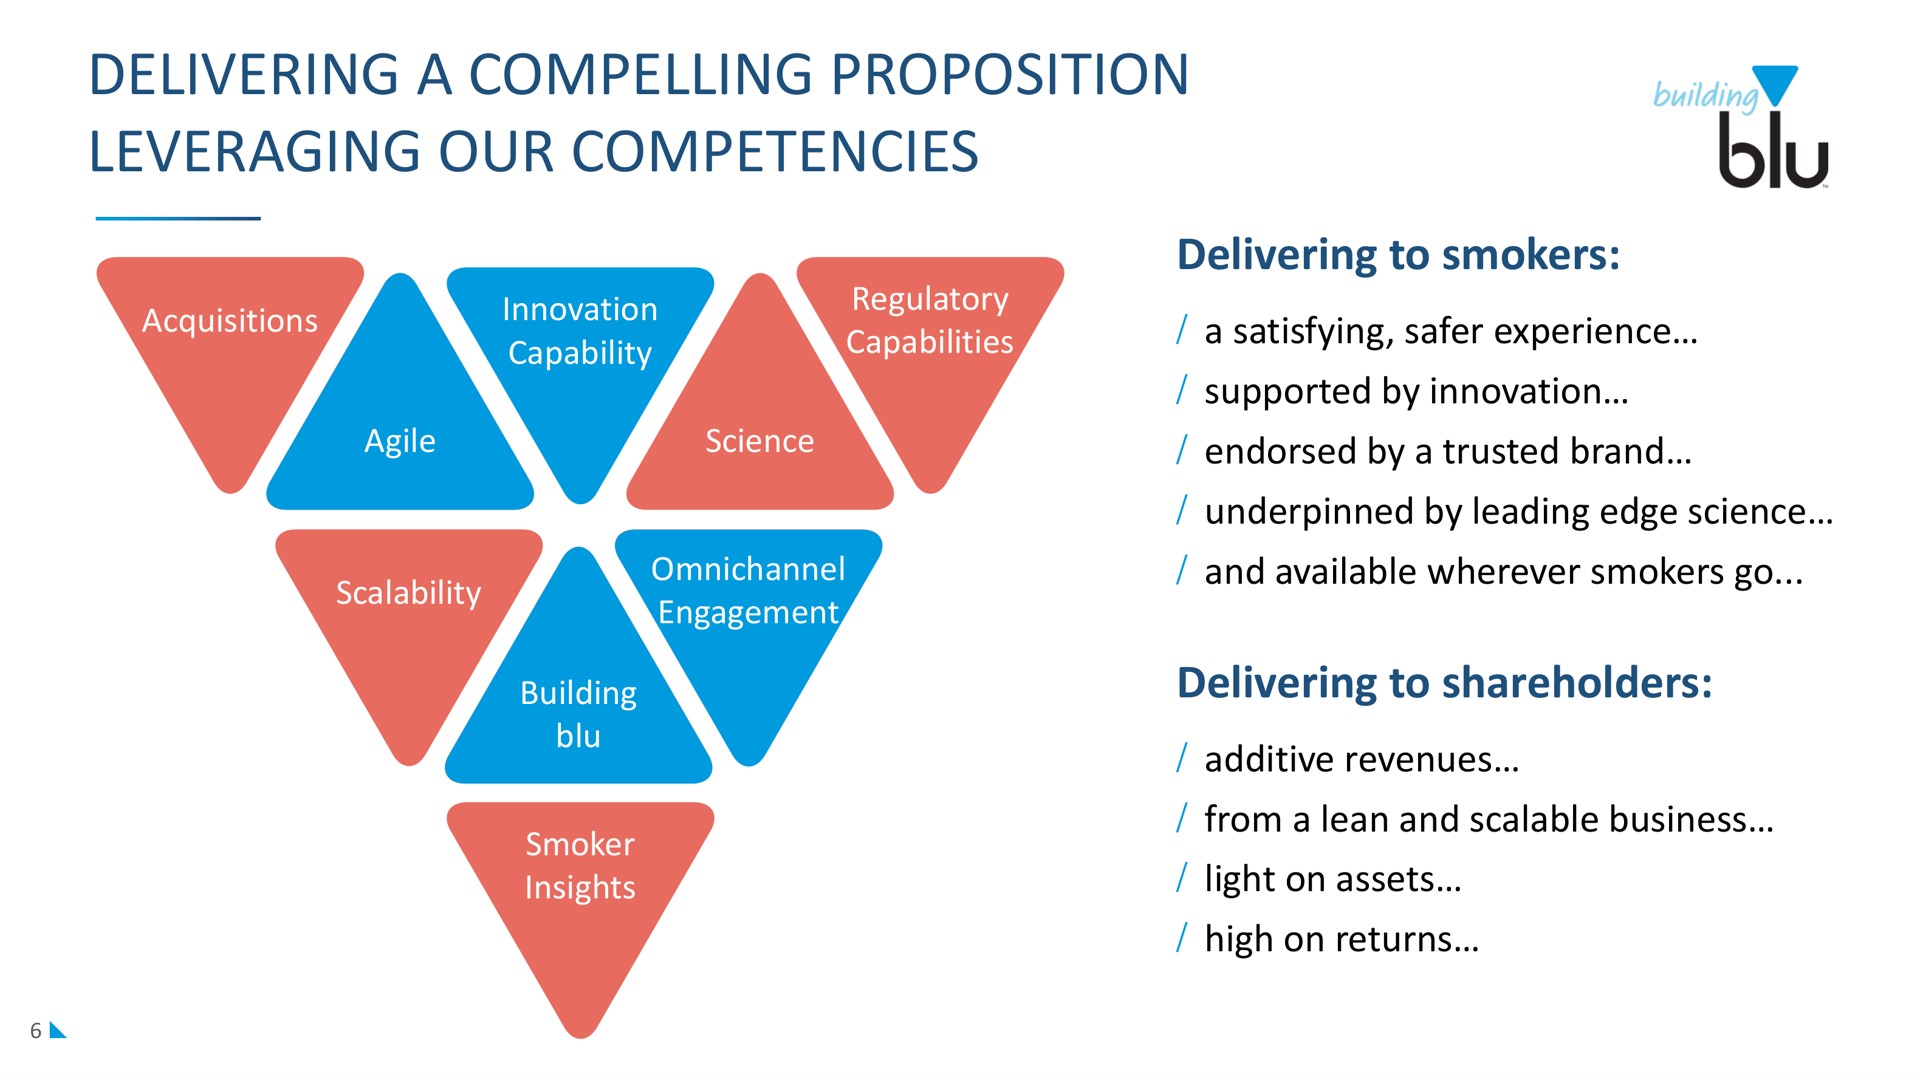 delivering a compelling proposition leveraging our competencies | Imperial Brands